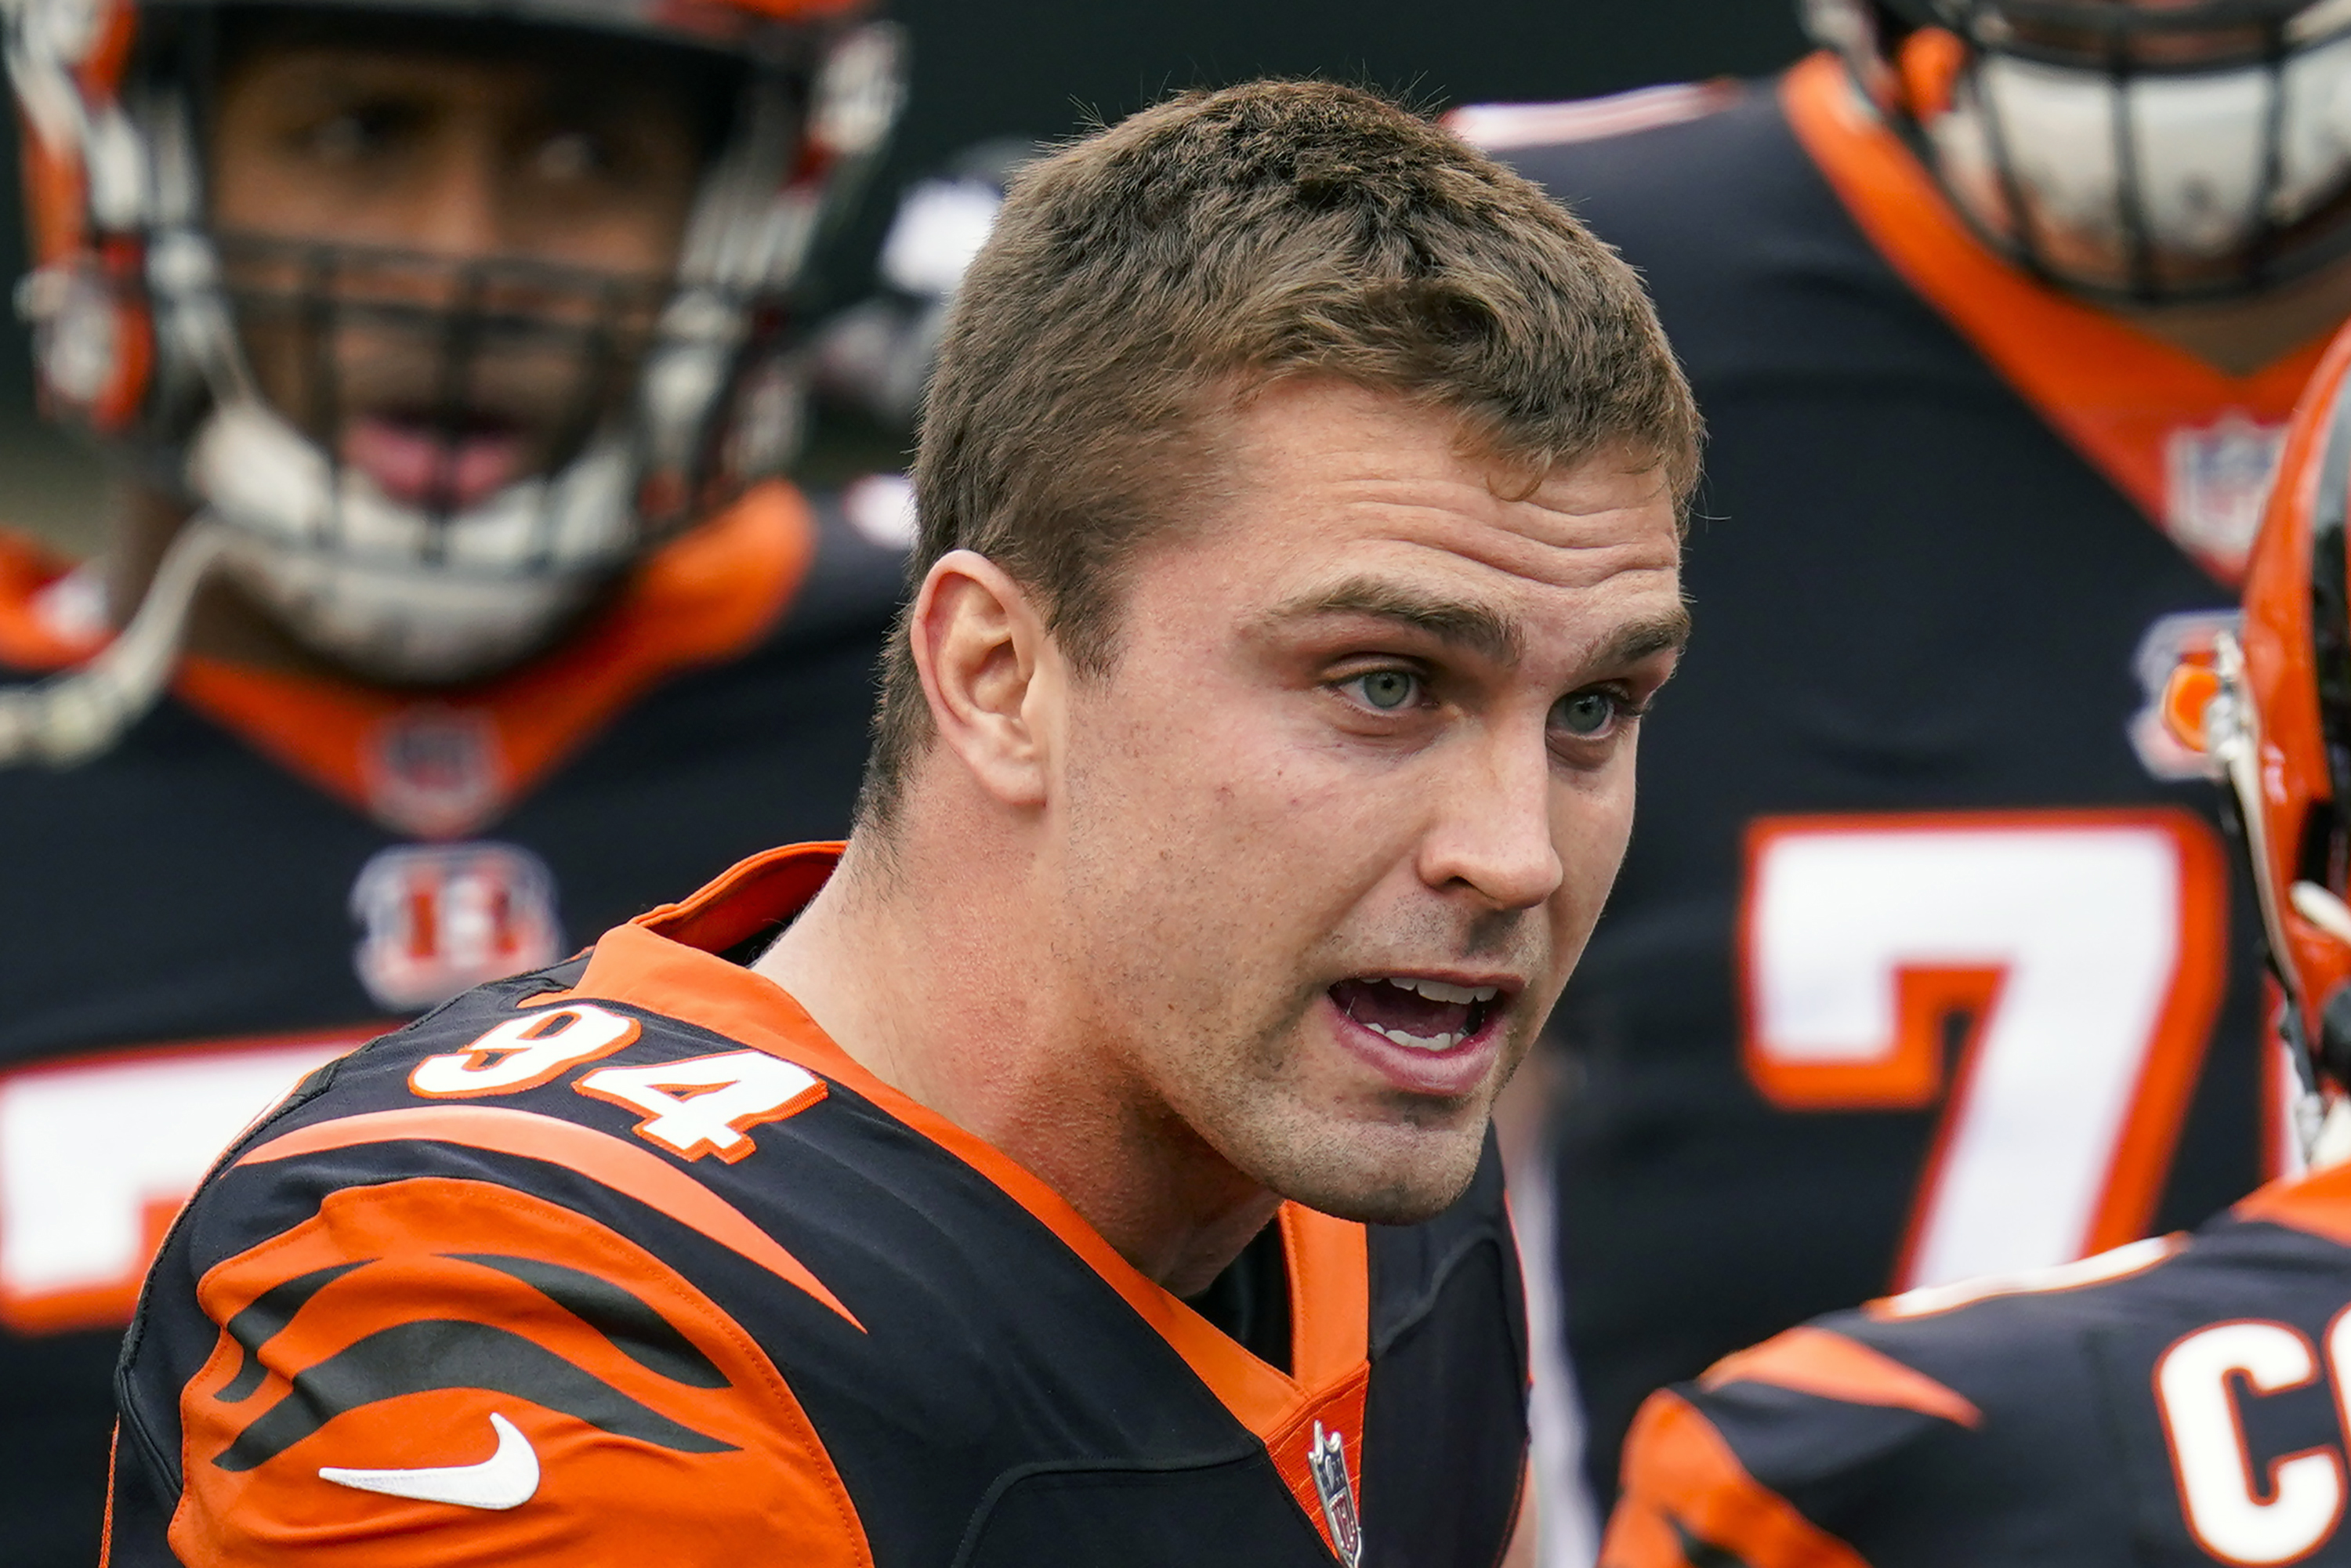 Bengals sign Sam Hubbard to four-year, $40 million contract